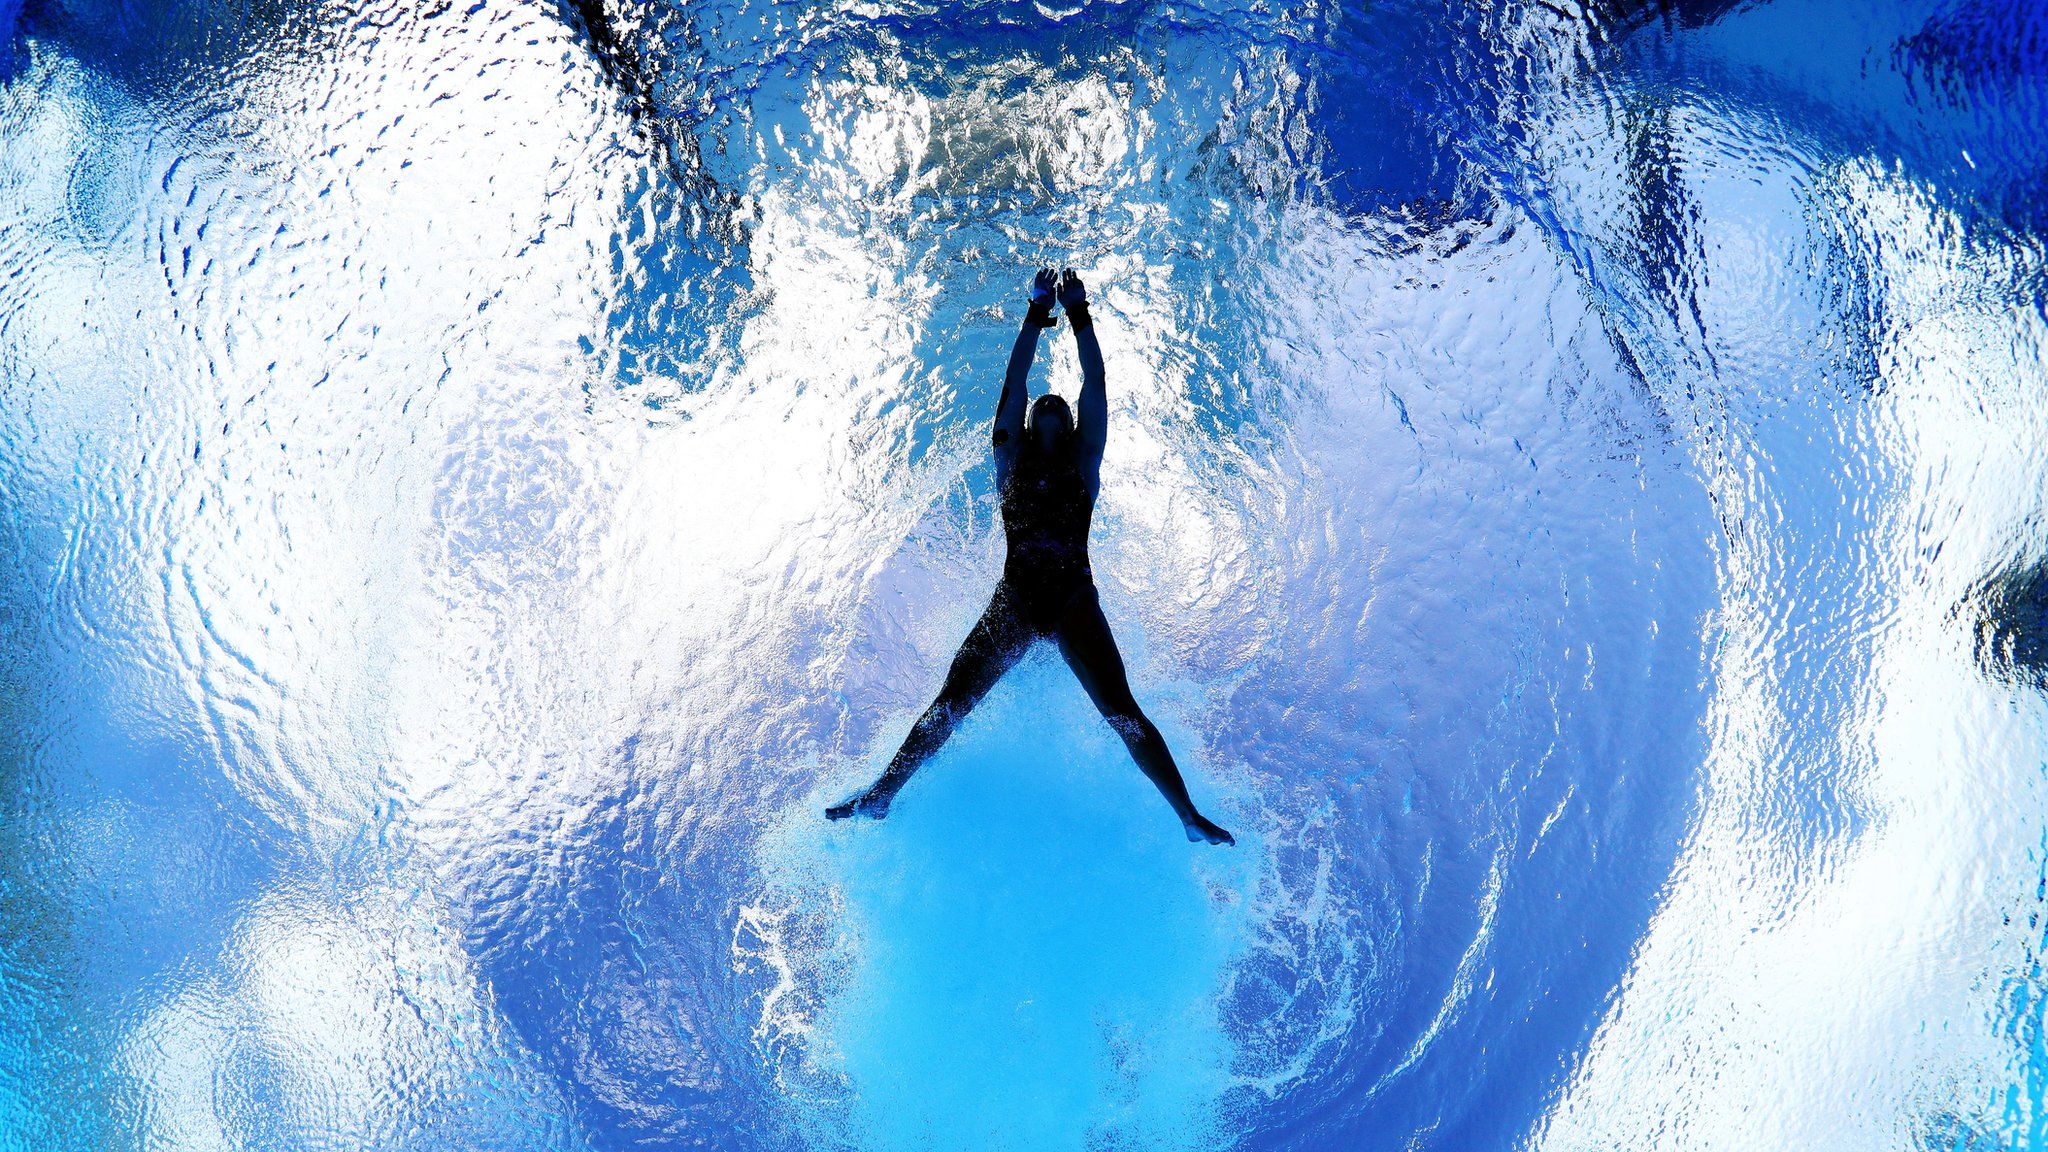 Caeli McKay of Canada competes in the women's 10m platform diving Preliminary on day eight of the Gold Coast 2018 Commonwealth Games